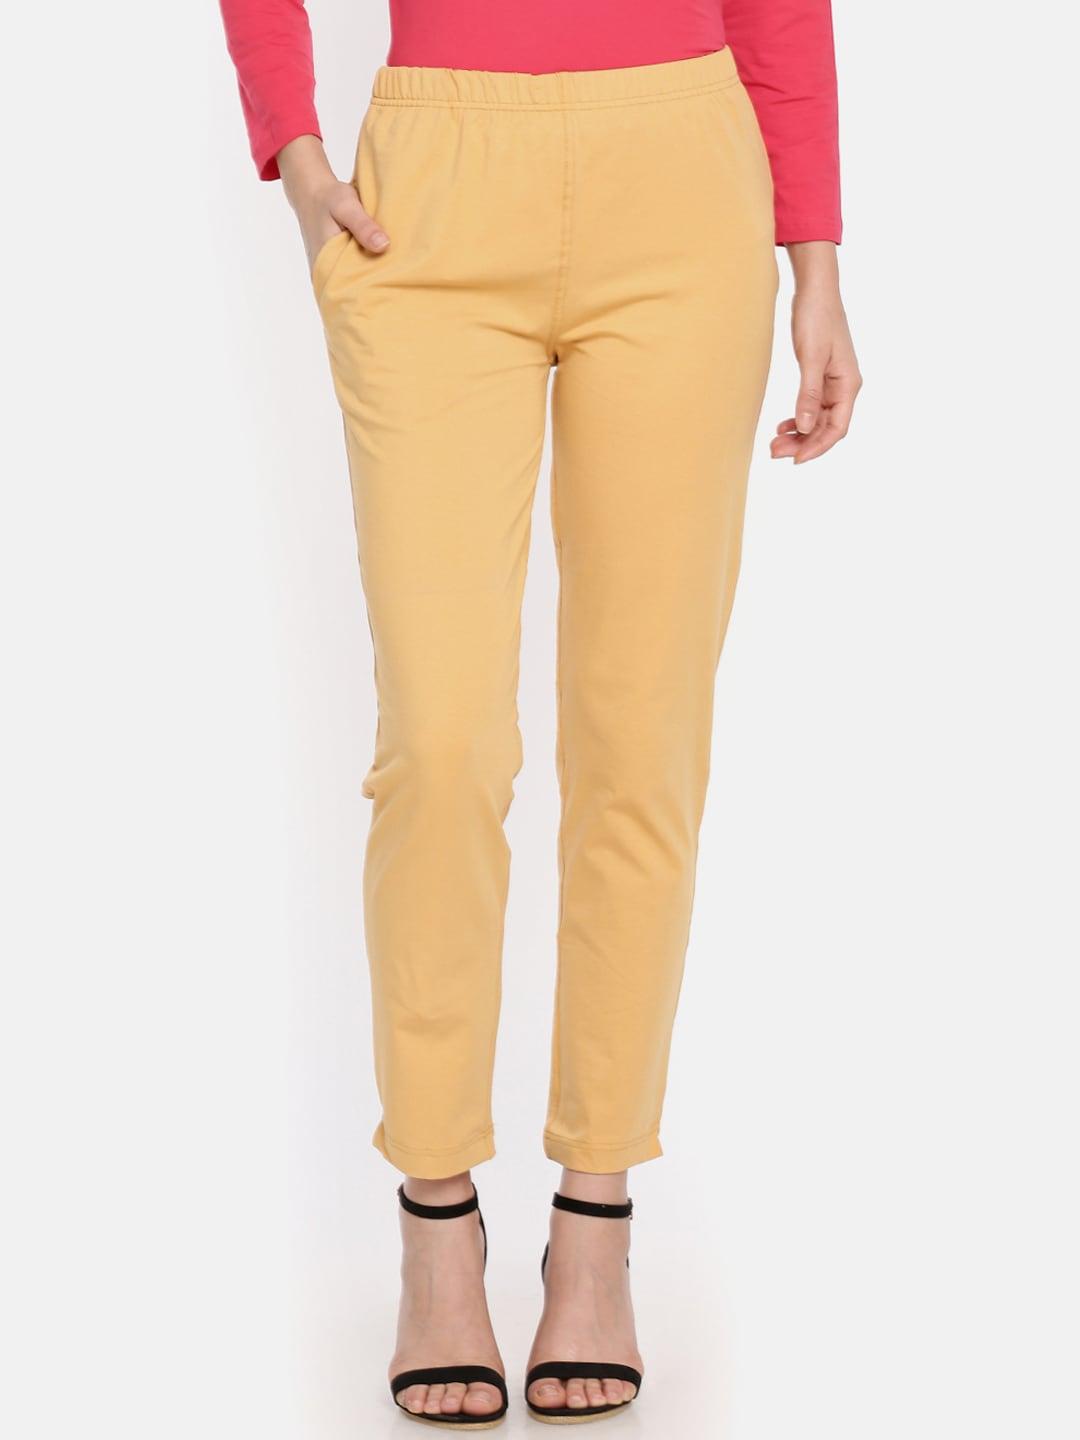 dollar-missy-women-mustard-yellow-solid-classic-straight-fit-cigarette-trousers